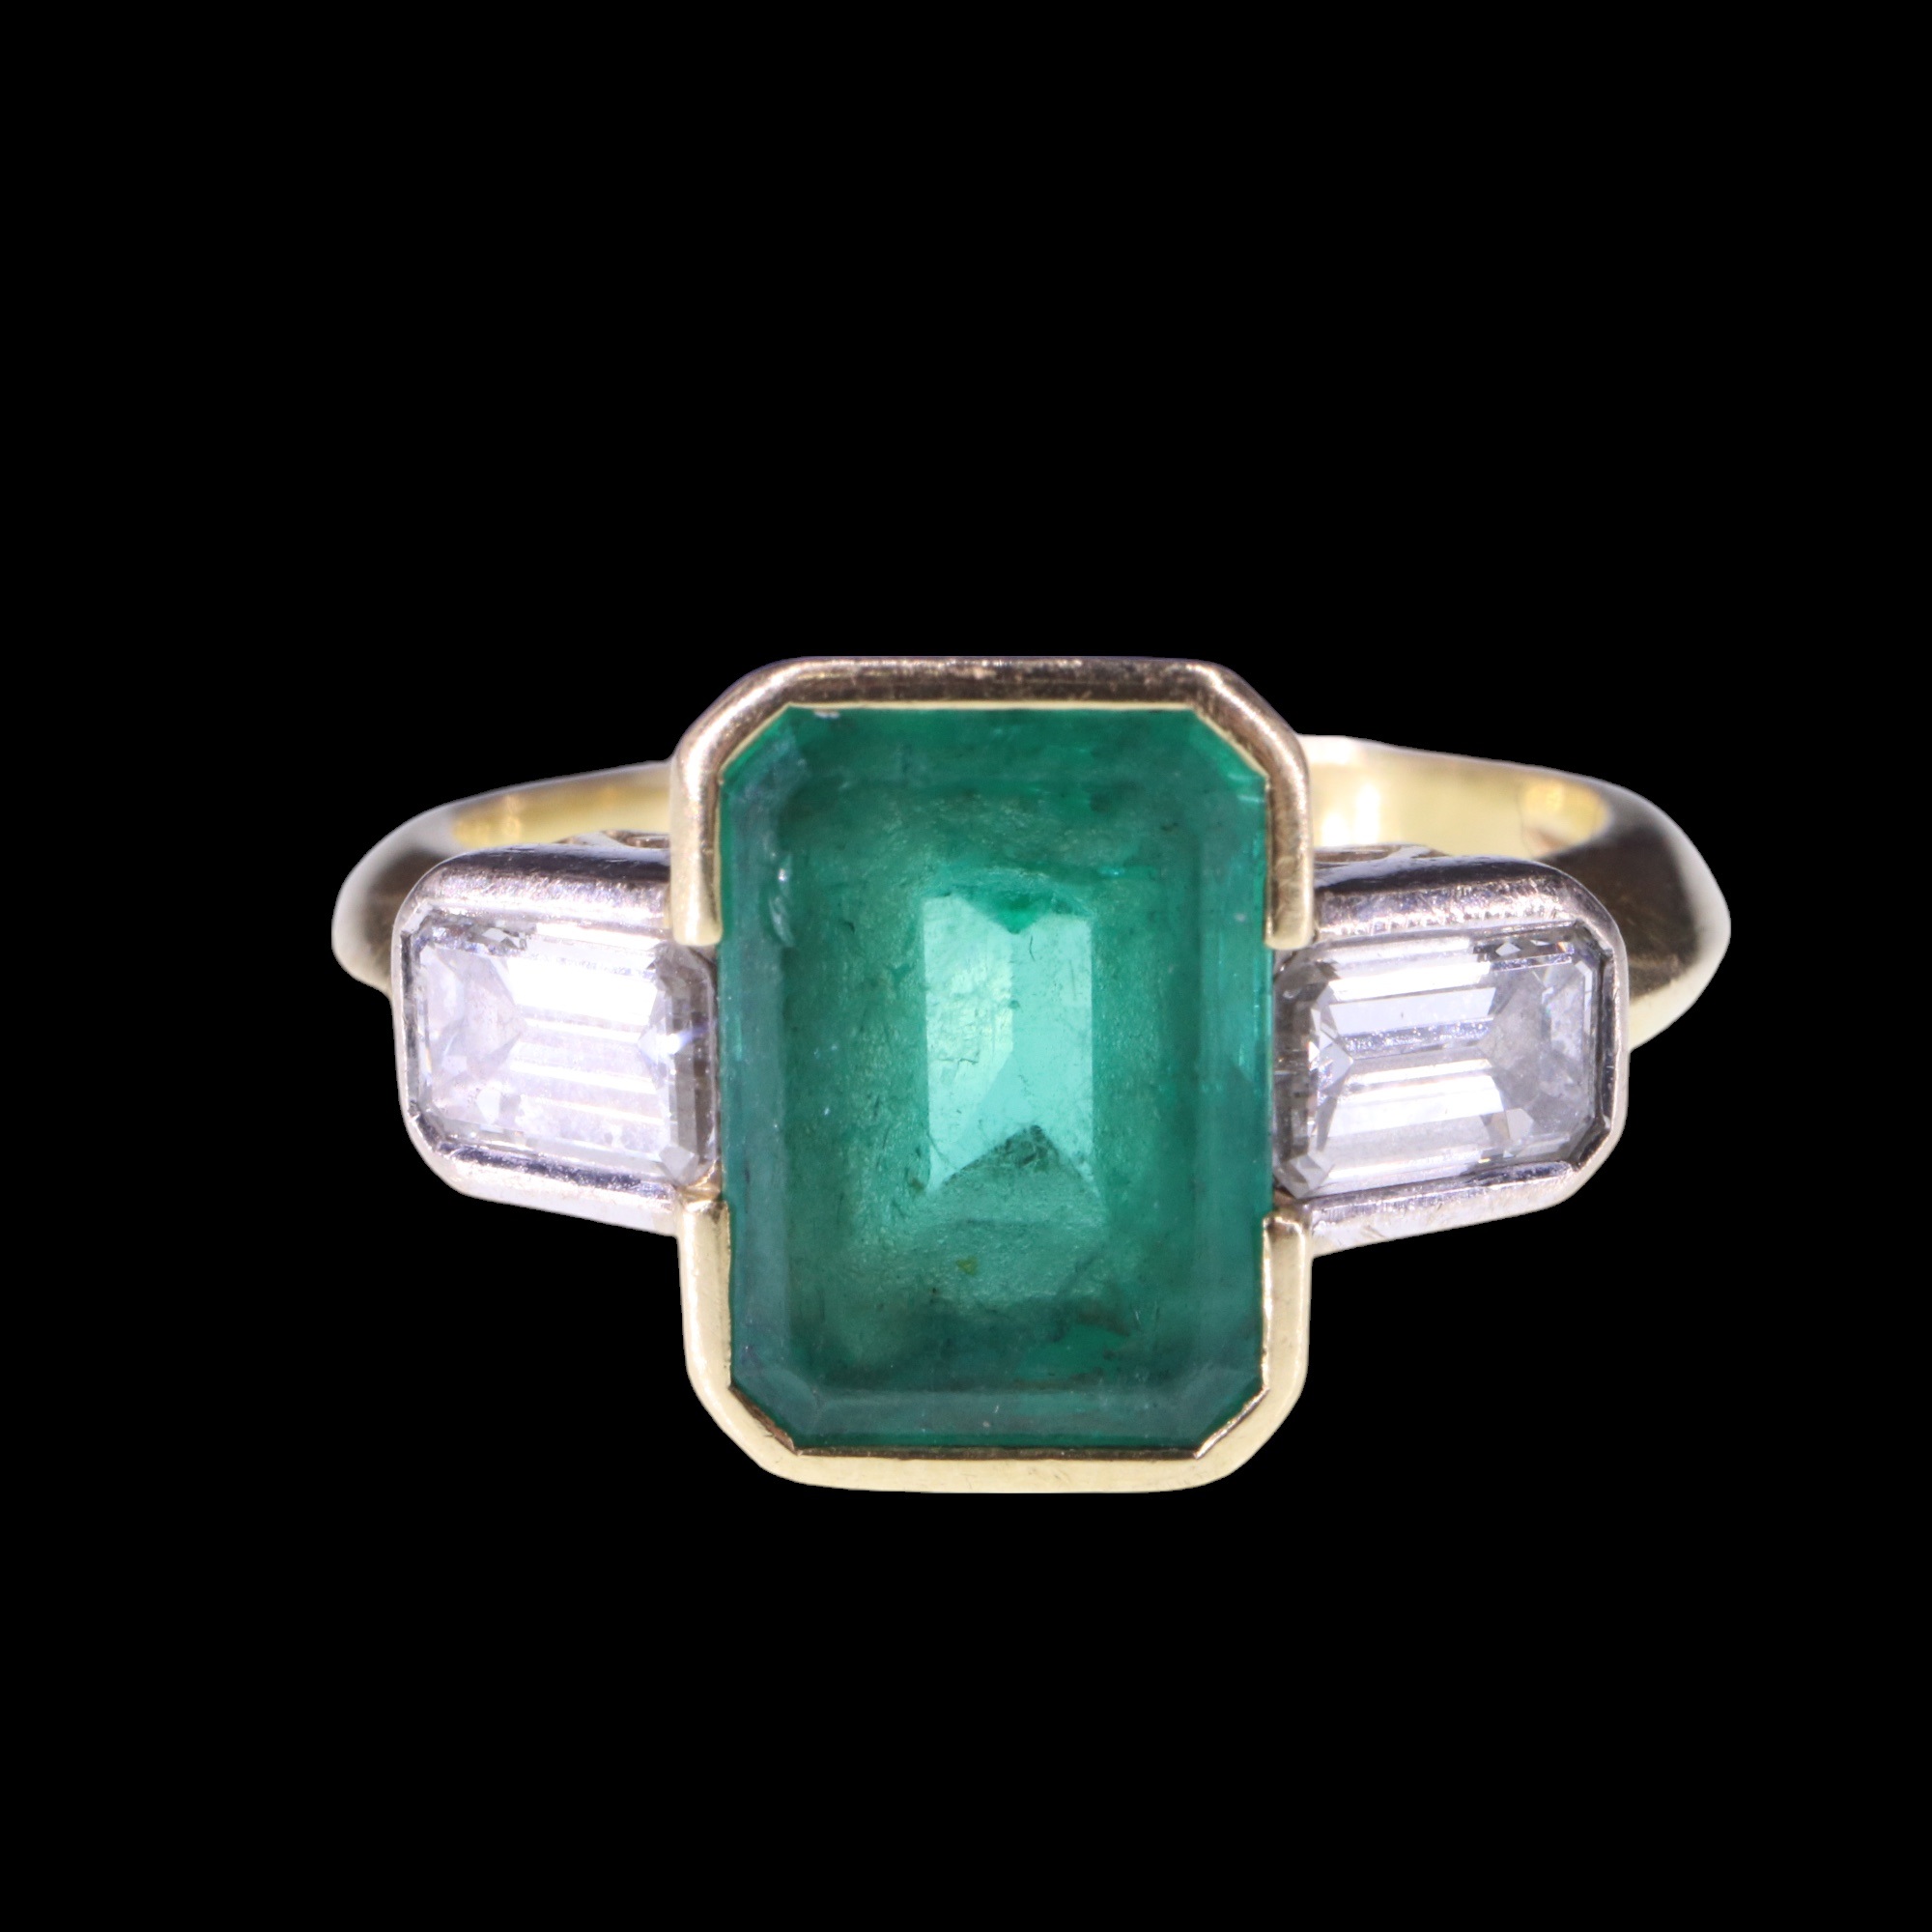 An impressive Art Deco style emerald and diamond ring, comprising a large emerald-cut stone of - Image 2 of 4